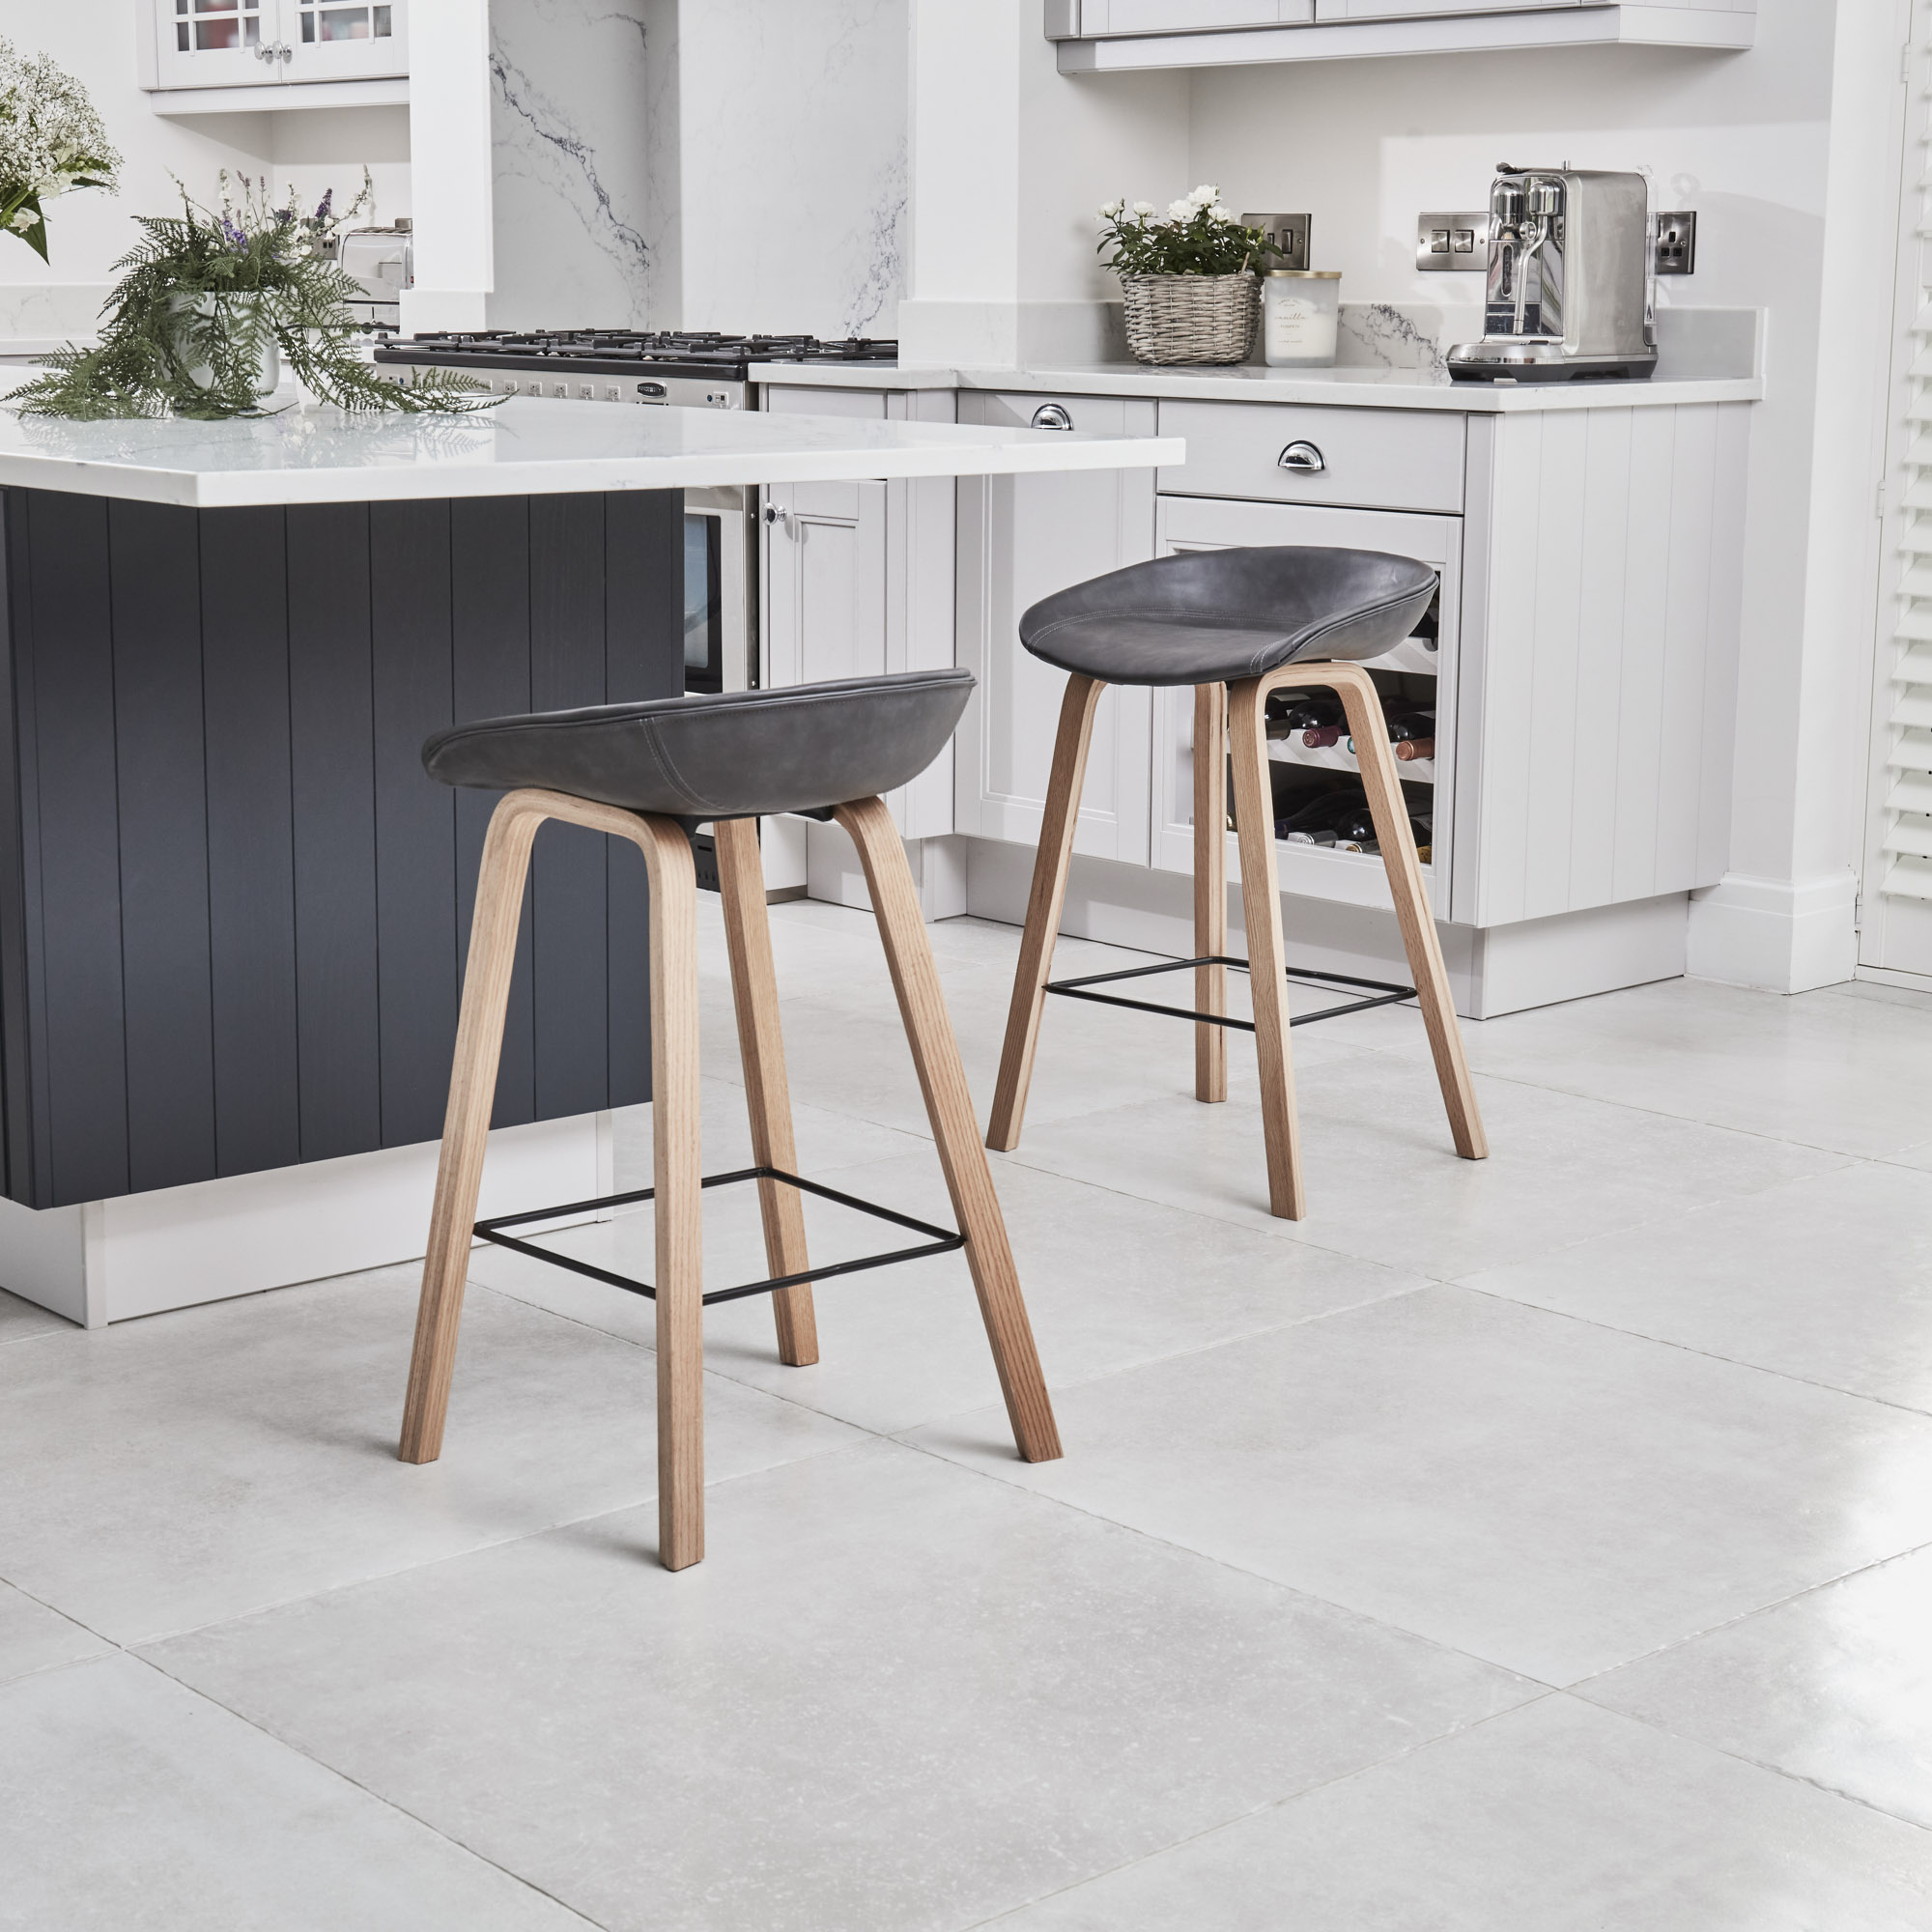 (Set of 2) Reigate Grey Faux Leather Kitchen Stool